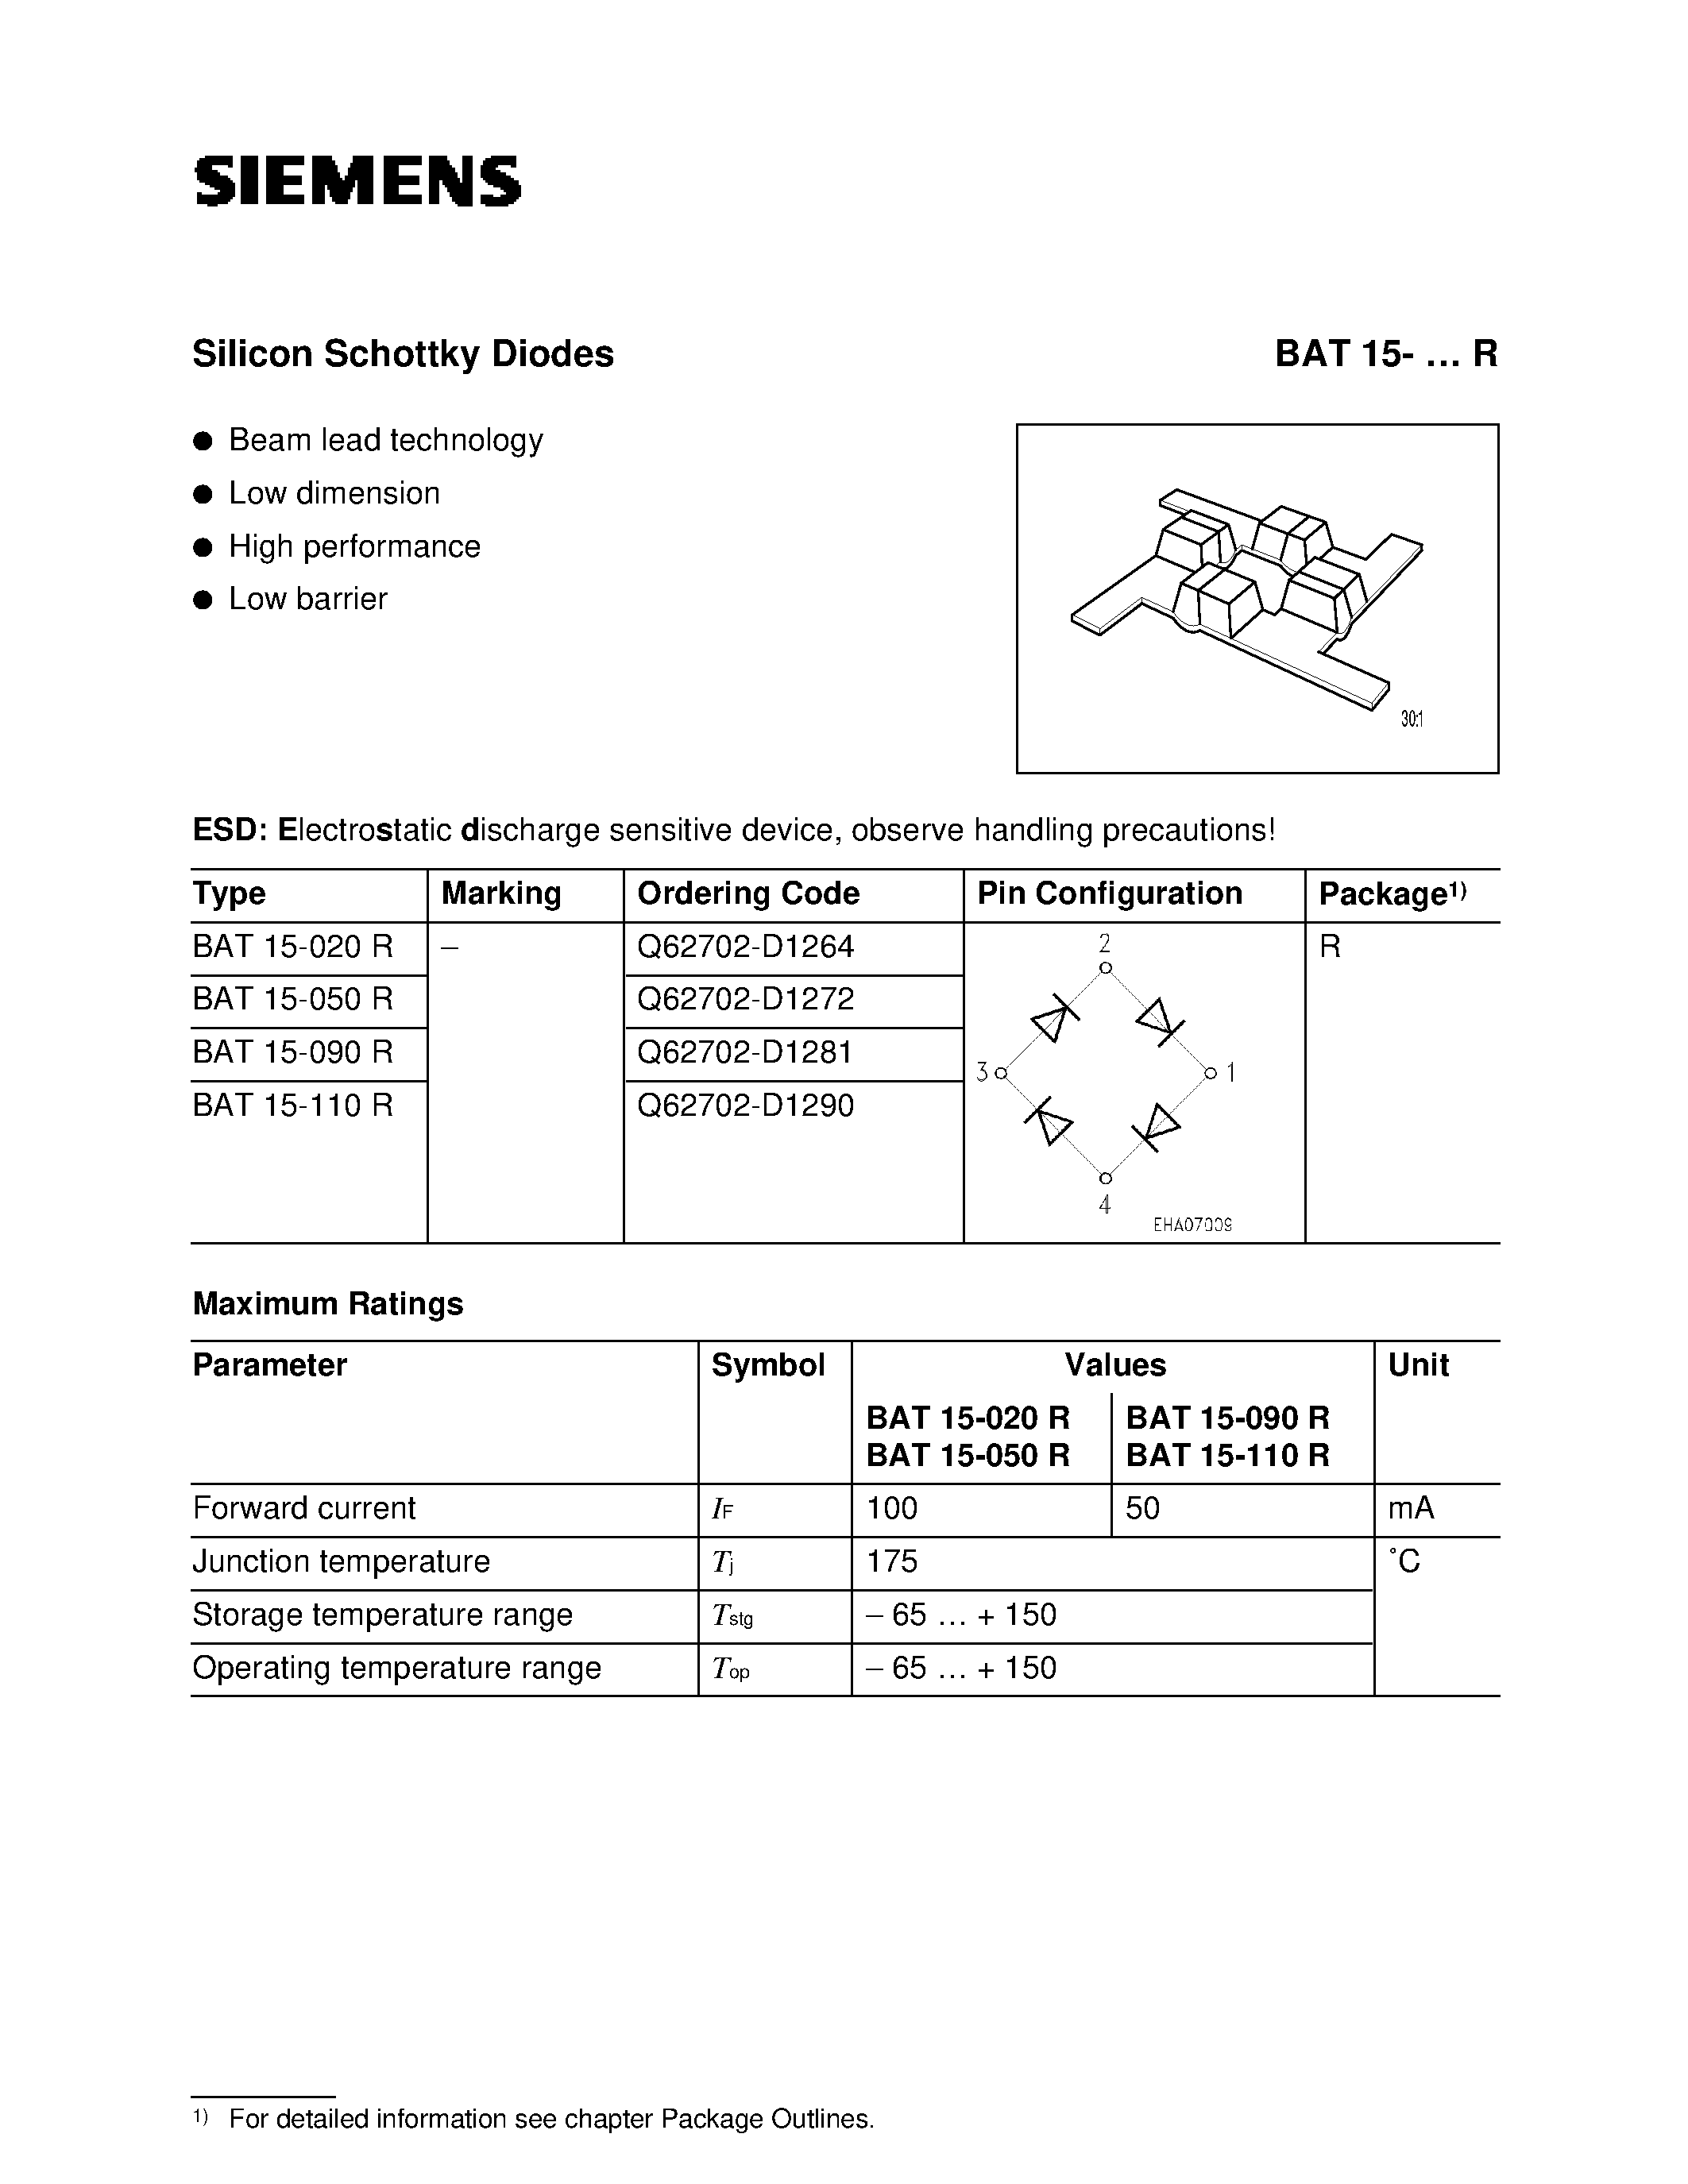 Datasheet BAT15-090R - Silicon Schottky Diodes (Beam lead technology Low dimension High performance Low barrier) page 1